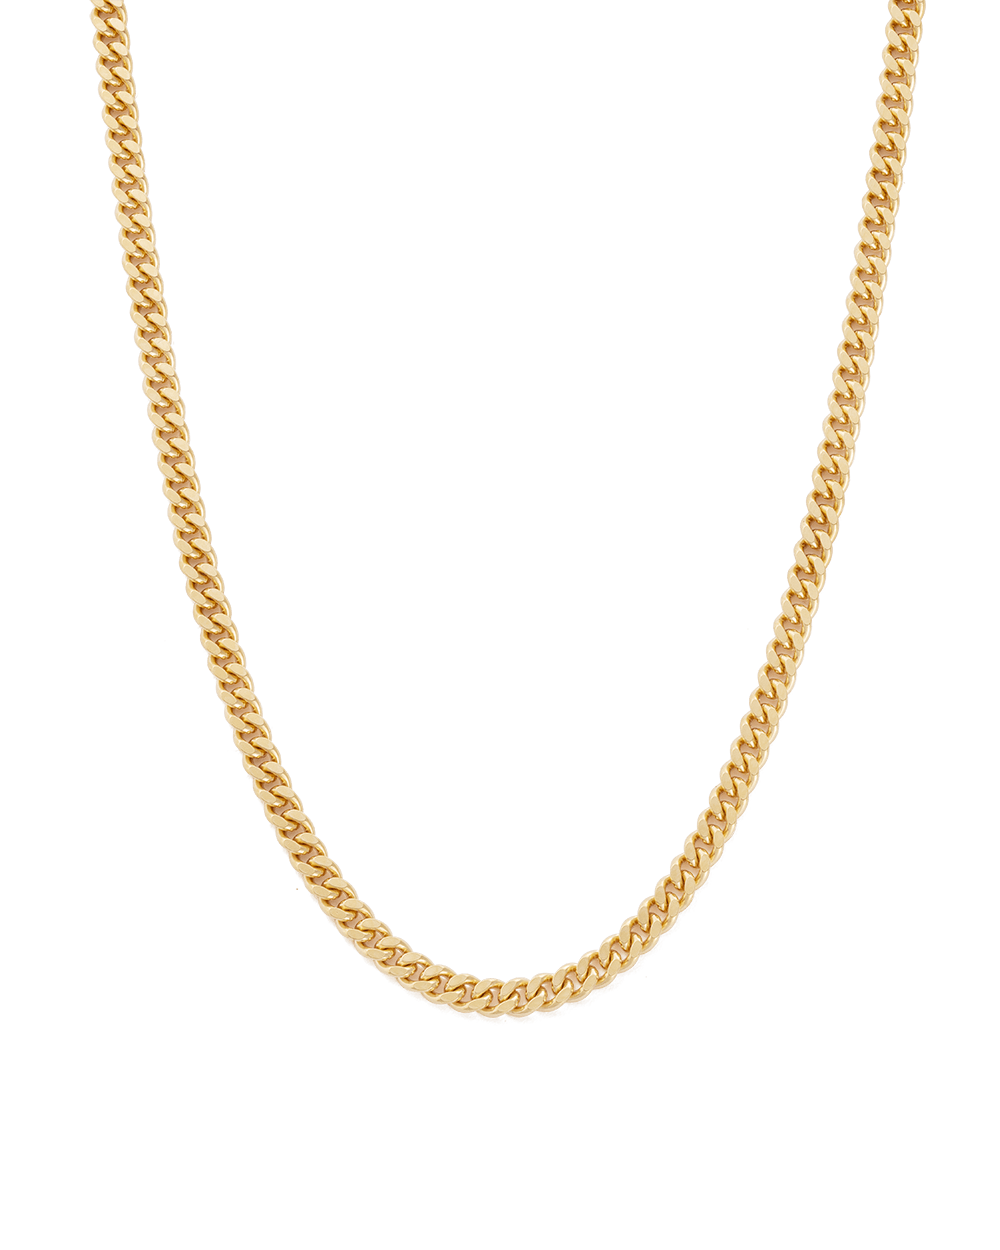 GLOW CHAIN NECKLACE (18K GOLD PLATED) - IMAGE 1